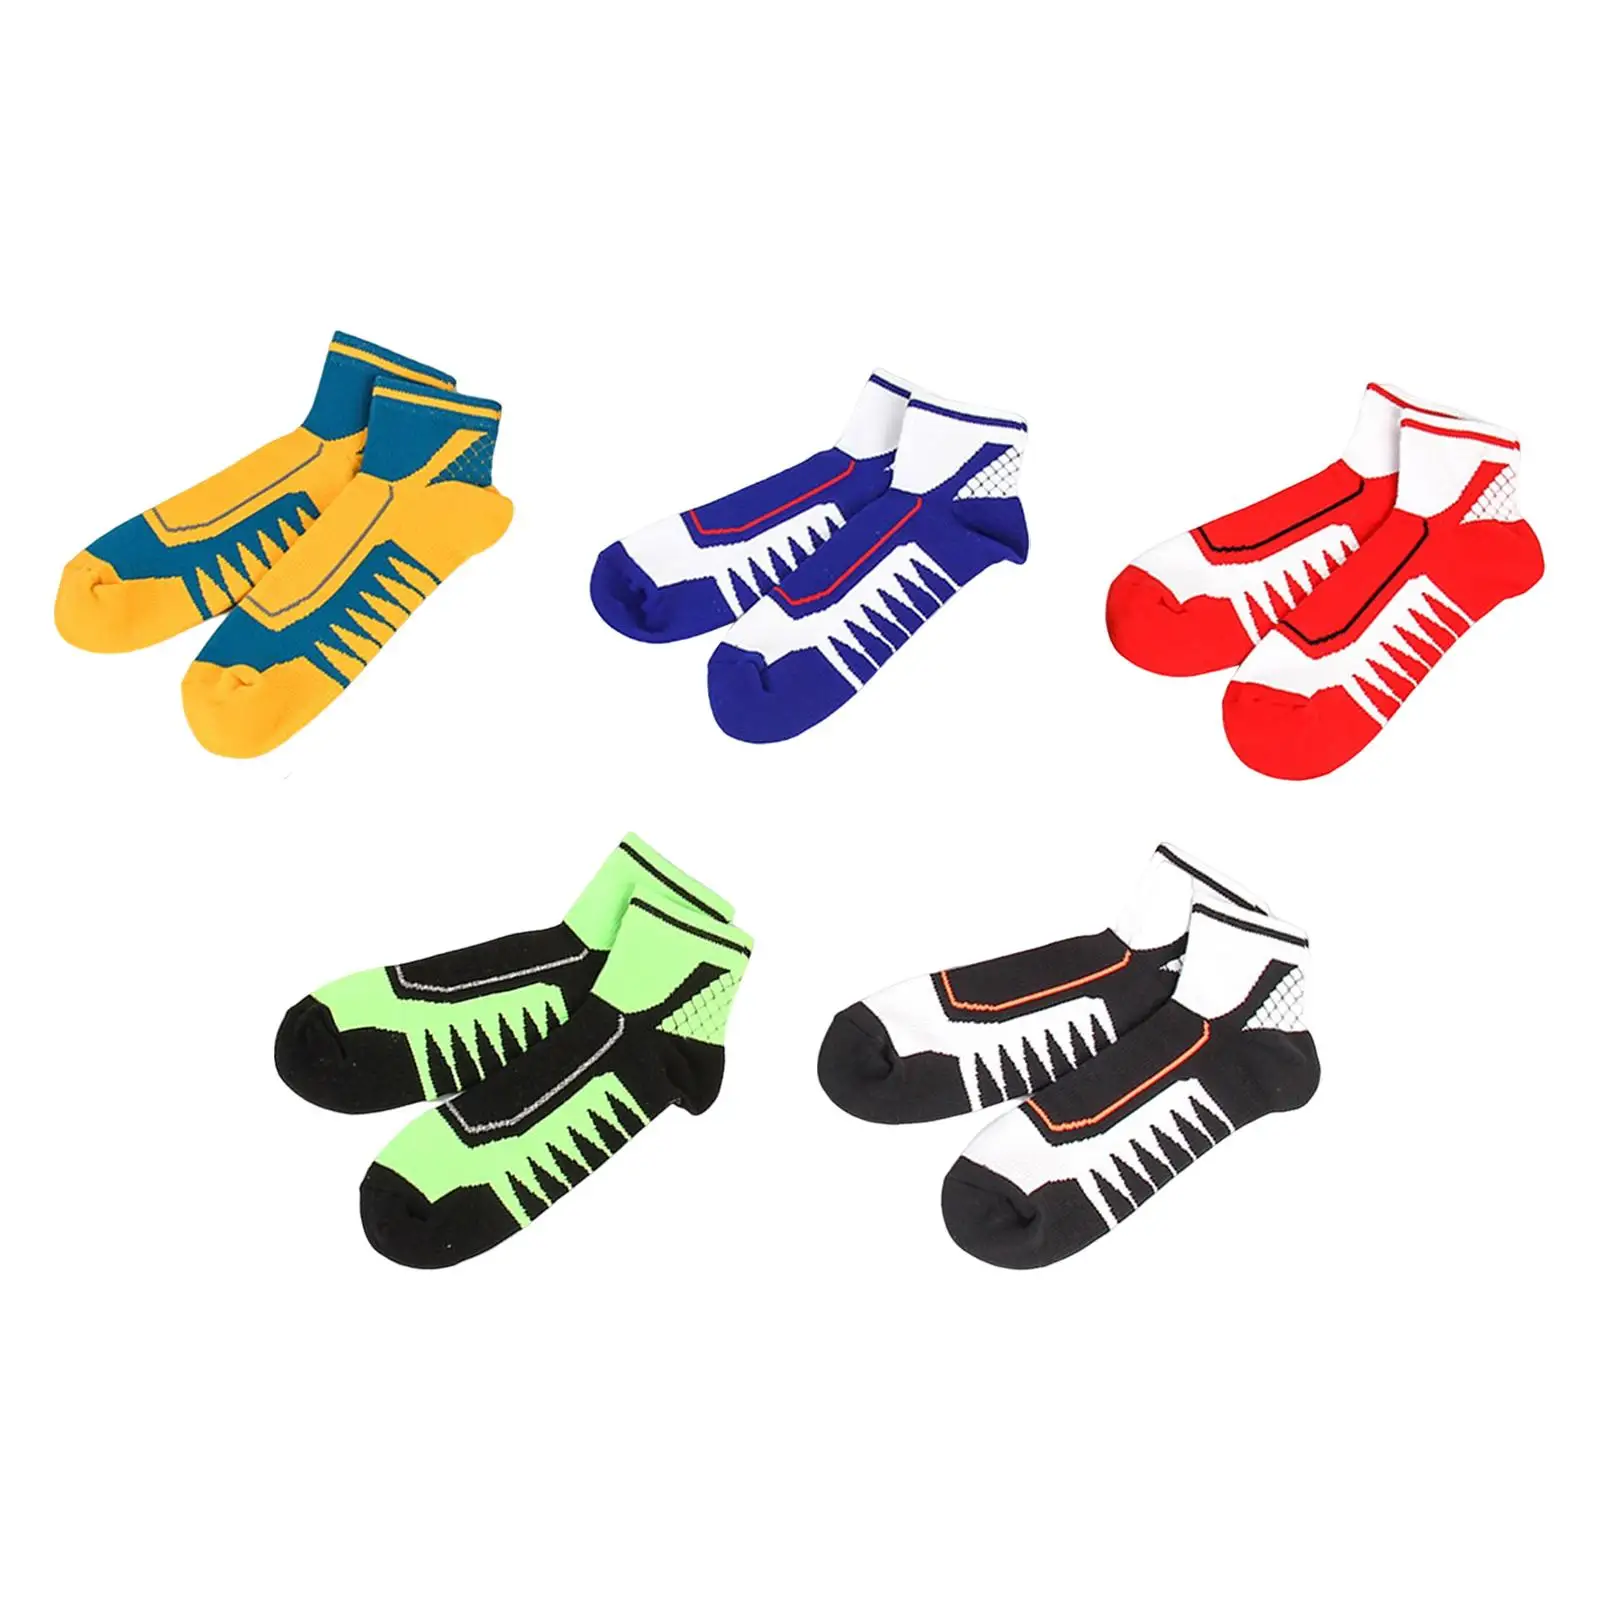 Athletic Sports Ankle Socks Winter Absorb Sweat Warm 5 Pairs Men Crew Socks for Soccer Volleyball Football Indoor Outdoor Hiking